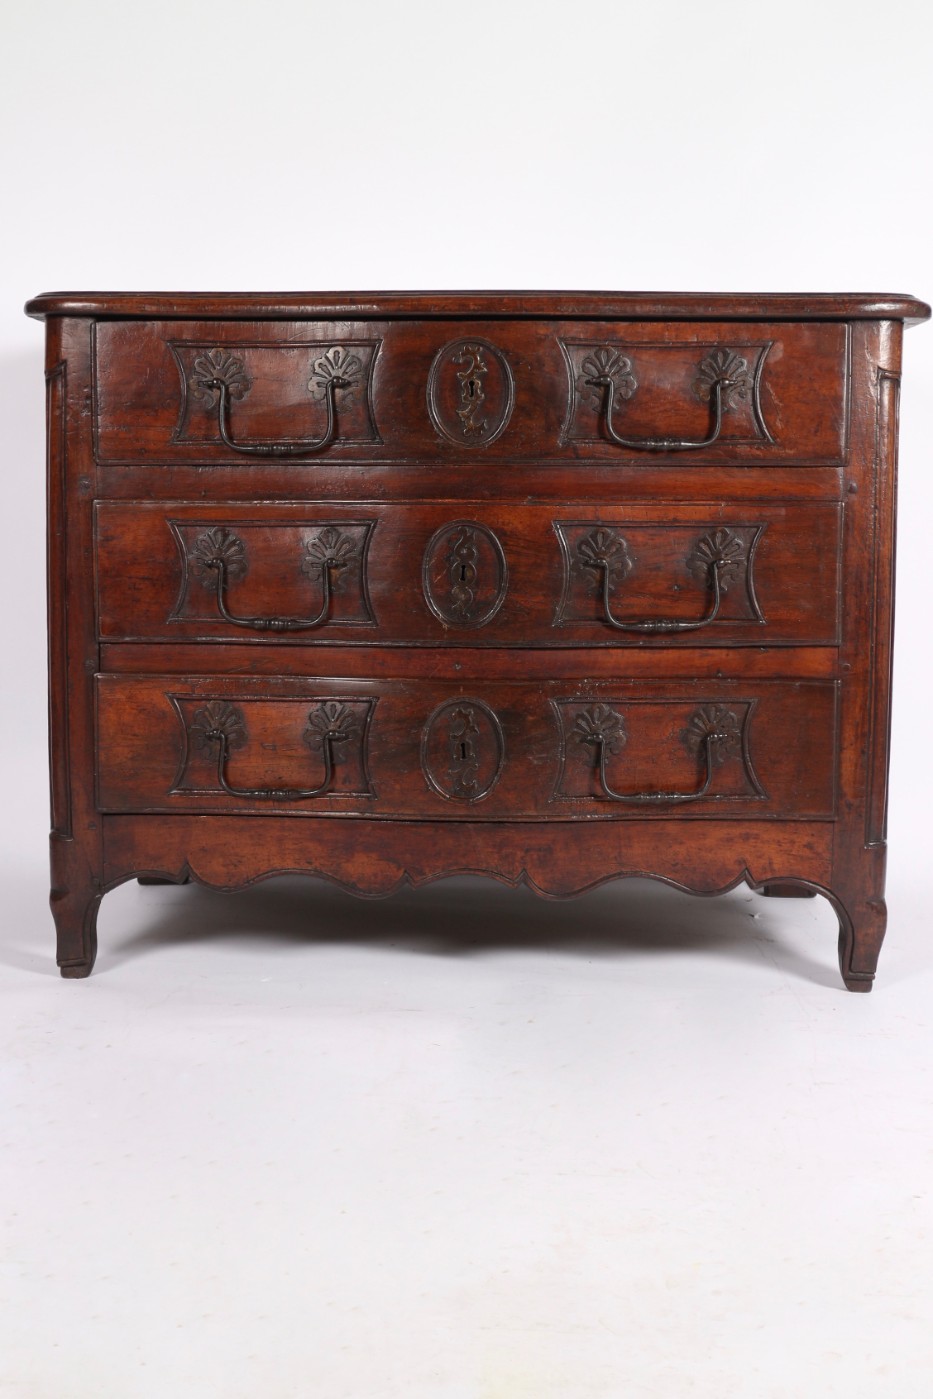 Mid 18th cent French walnut chest of drawers